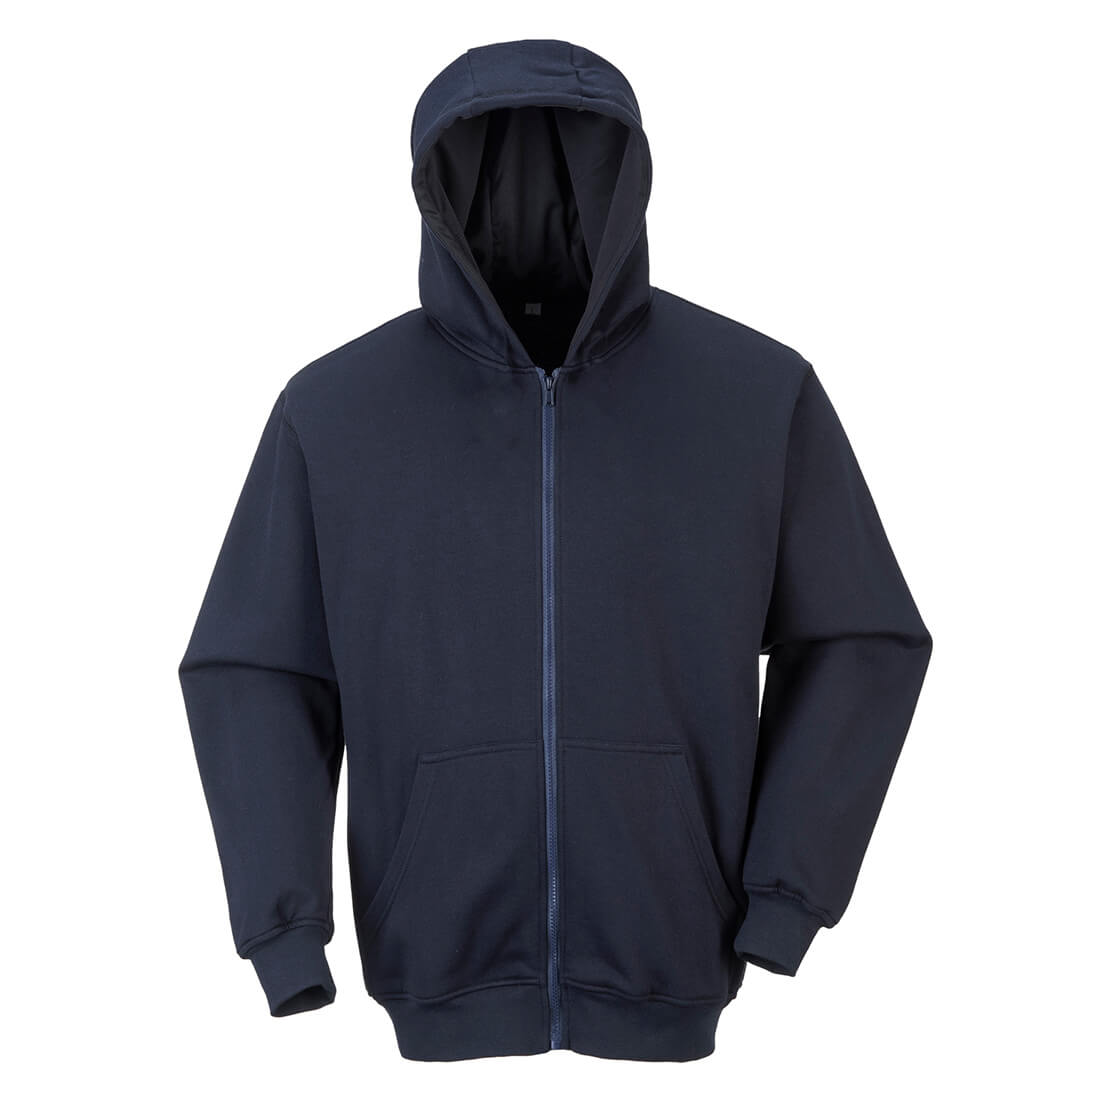 Image of Modaflame Mens Anti Static Flame Resistant Hoodie Navy 2XL